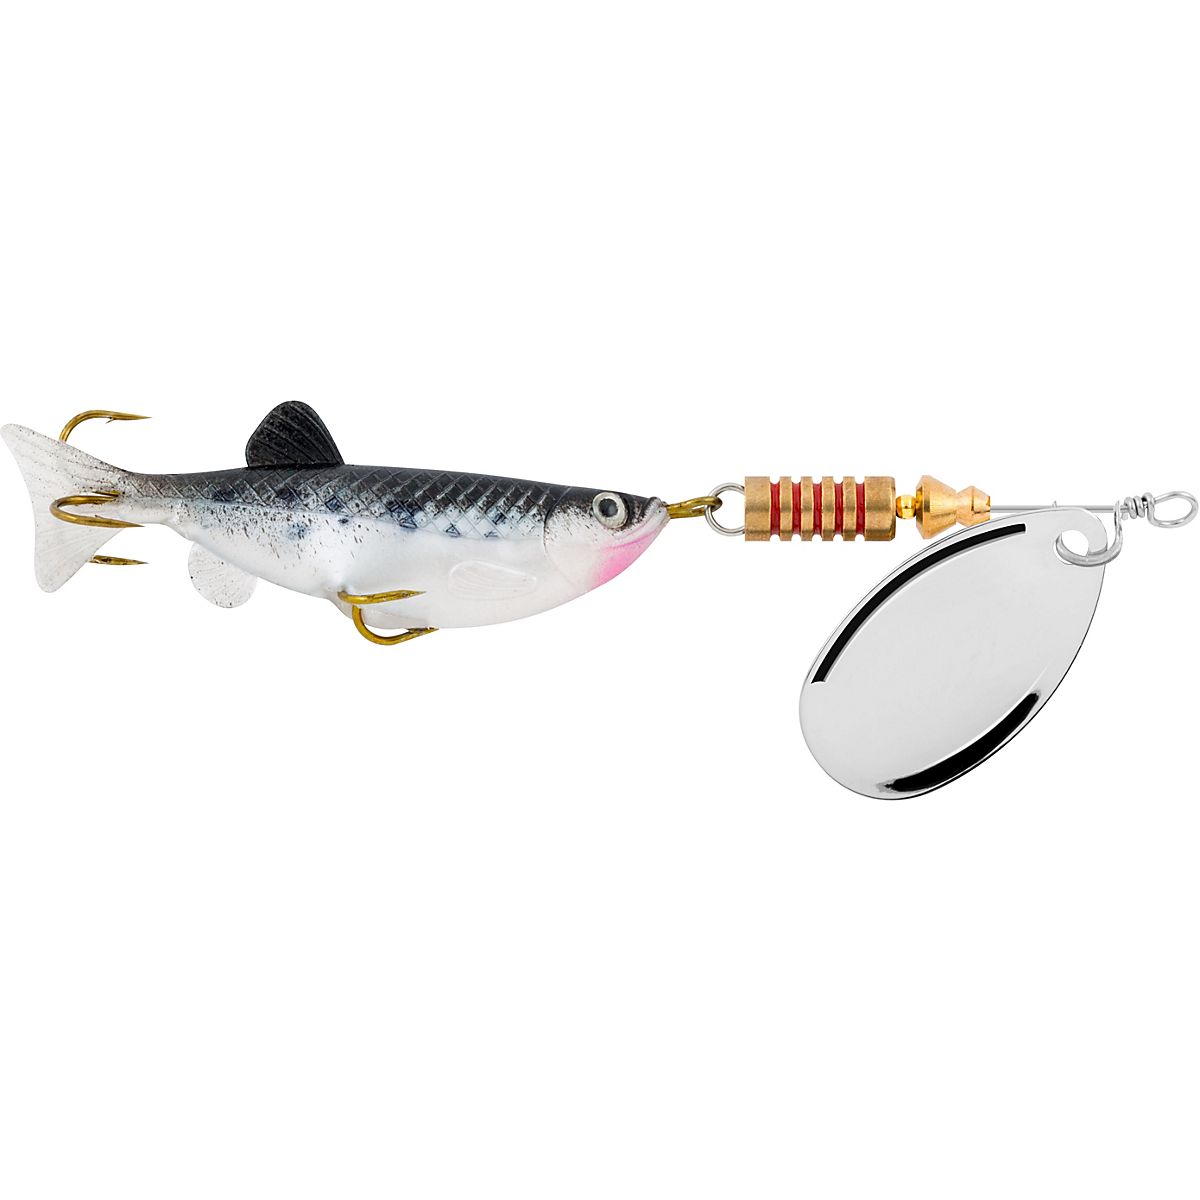 South Bend Minnow Spinner Bait